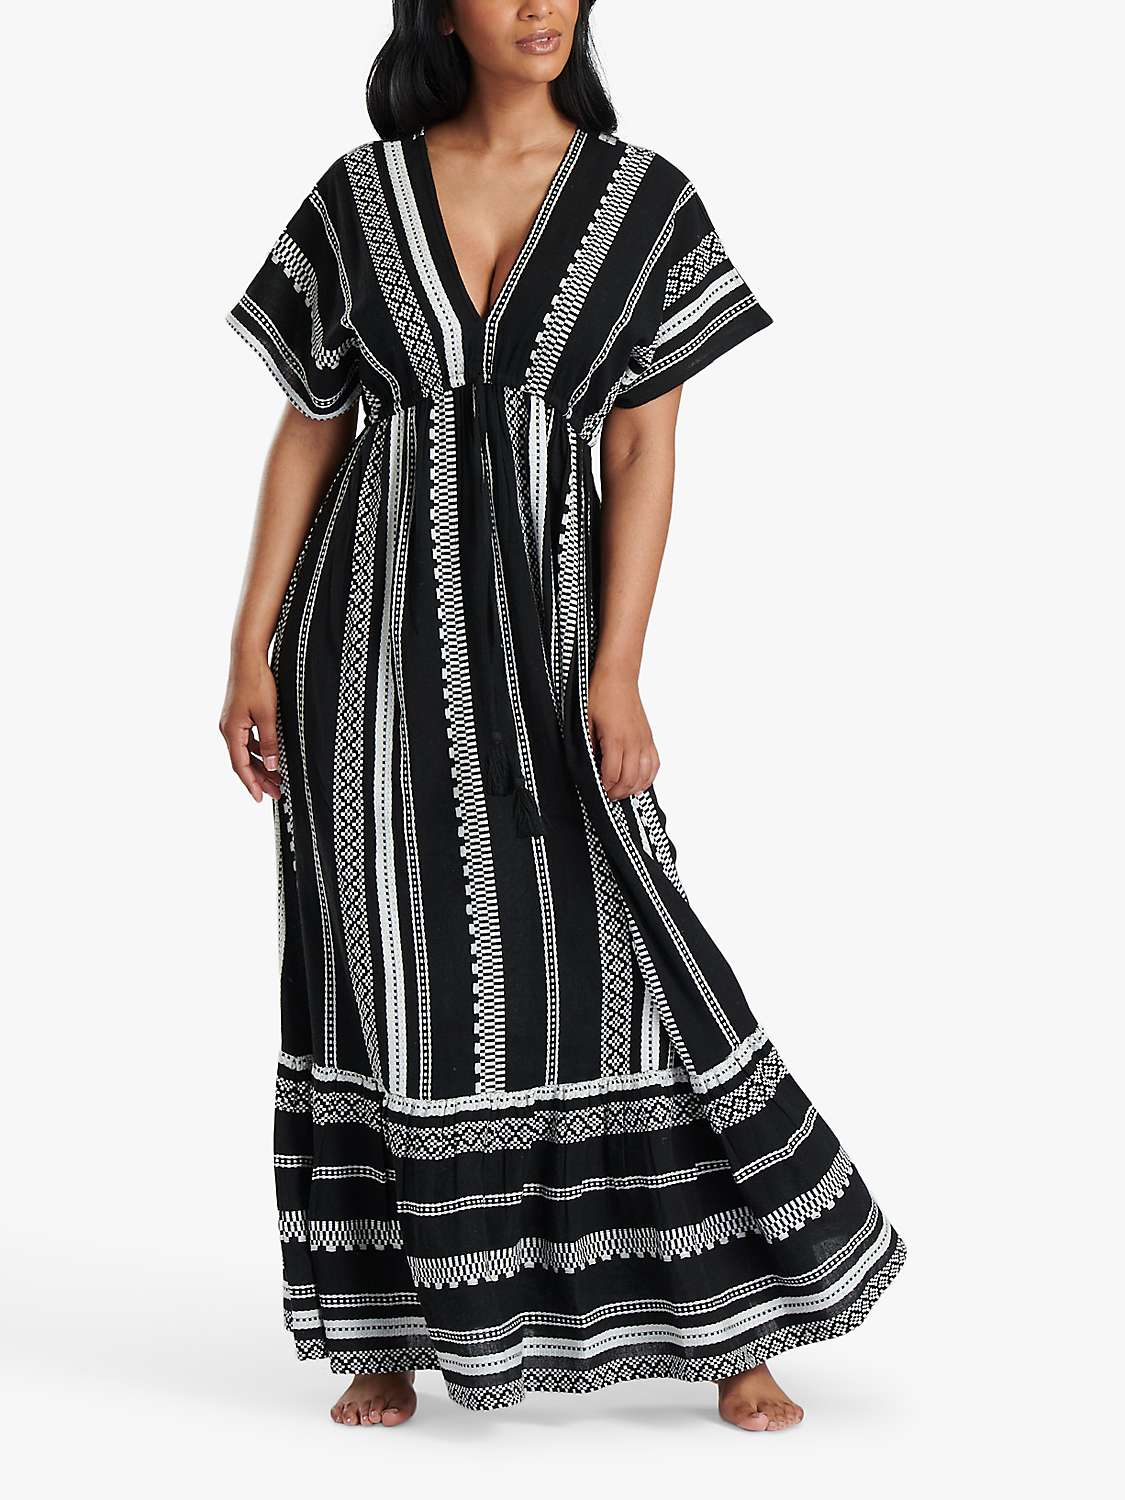 Buy South Beach Tiered Maxi Dress, Black Online at johnlewis.com